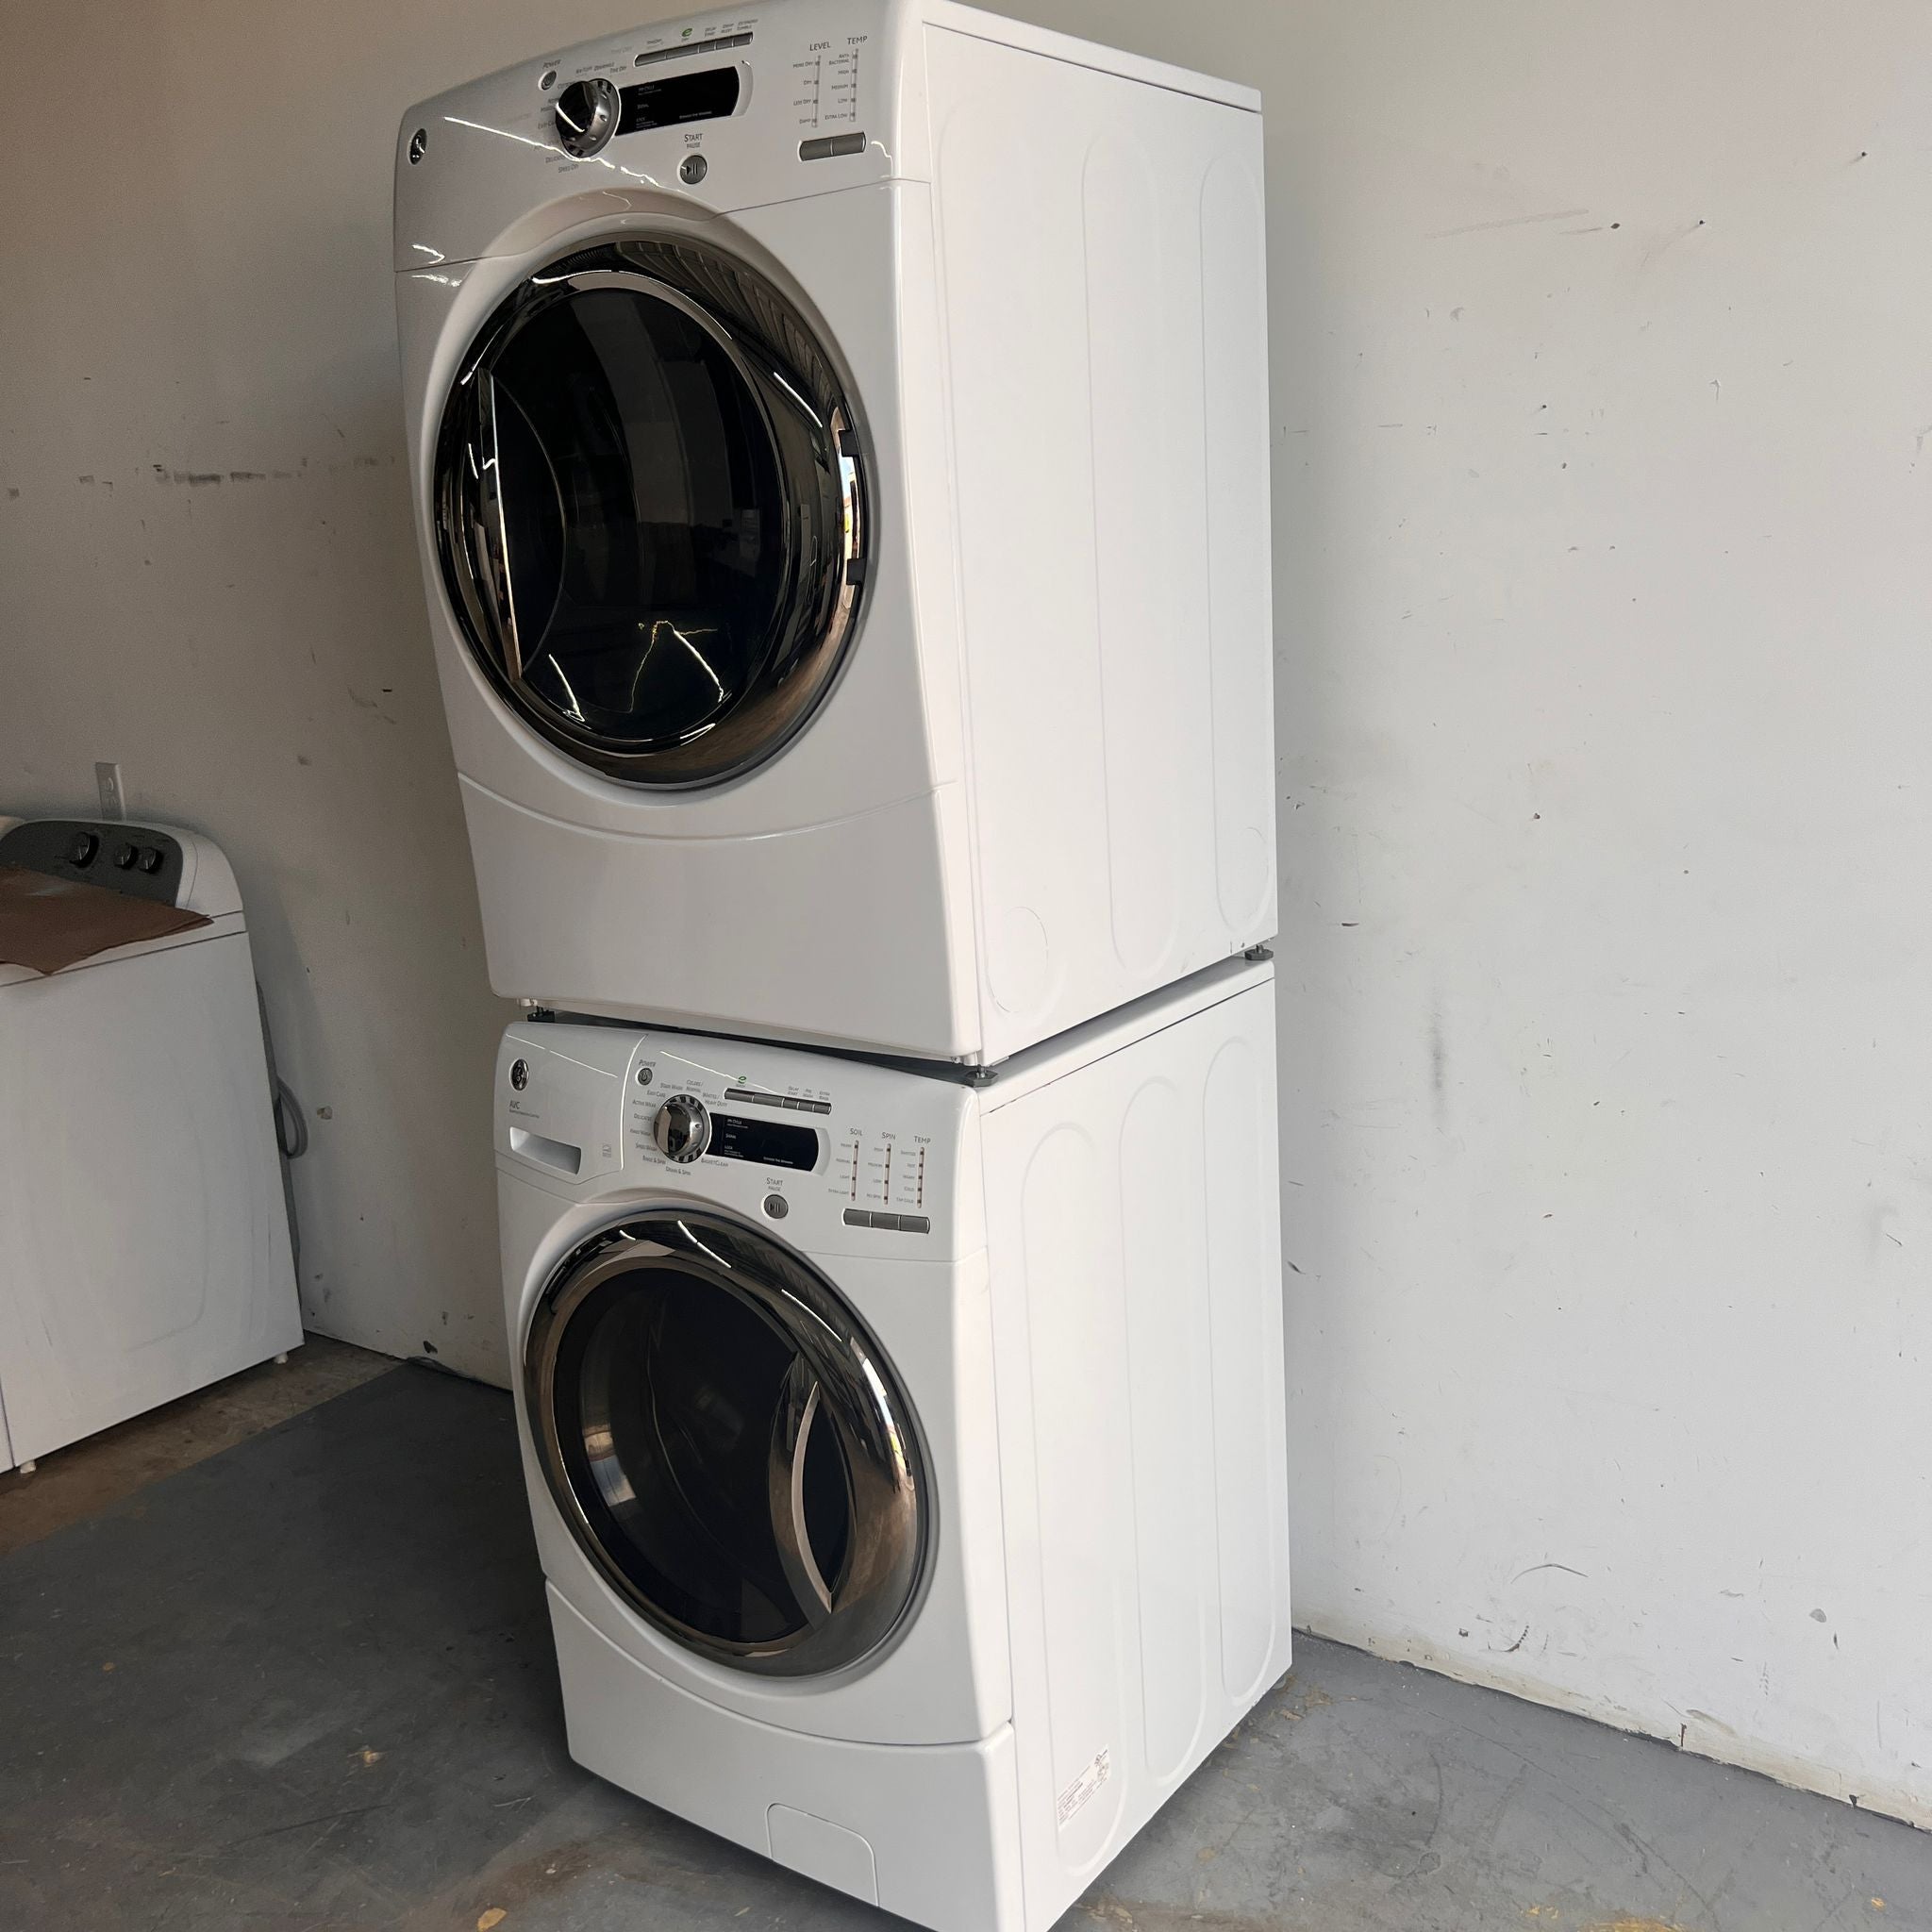 GE Washer and Dryer Front Load - White